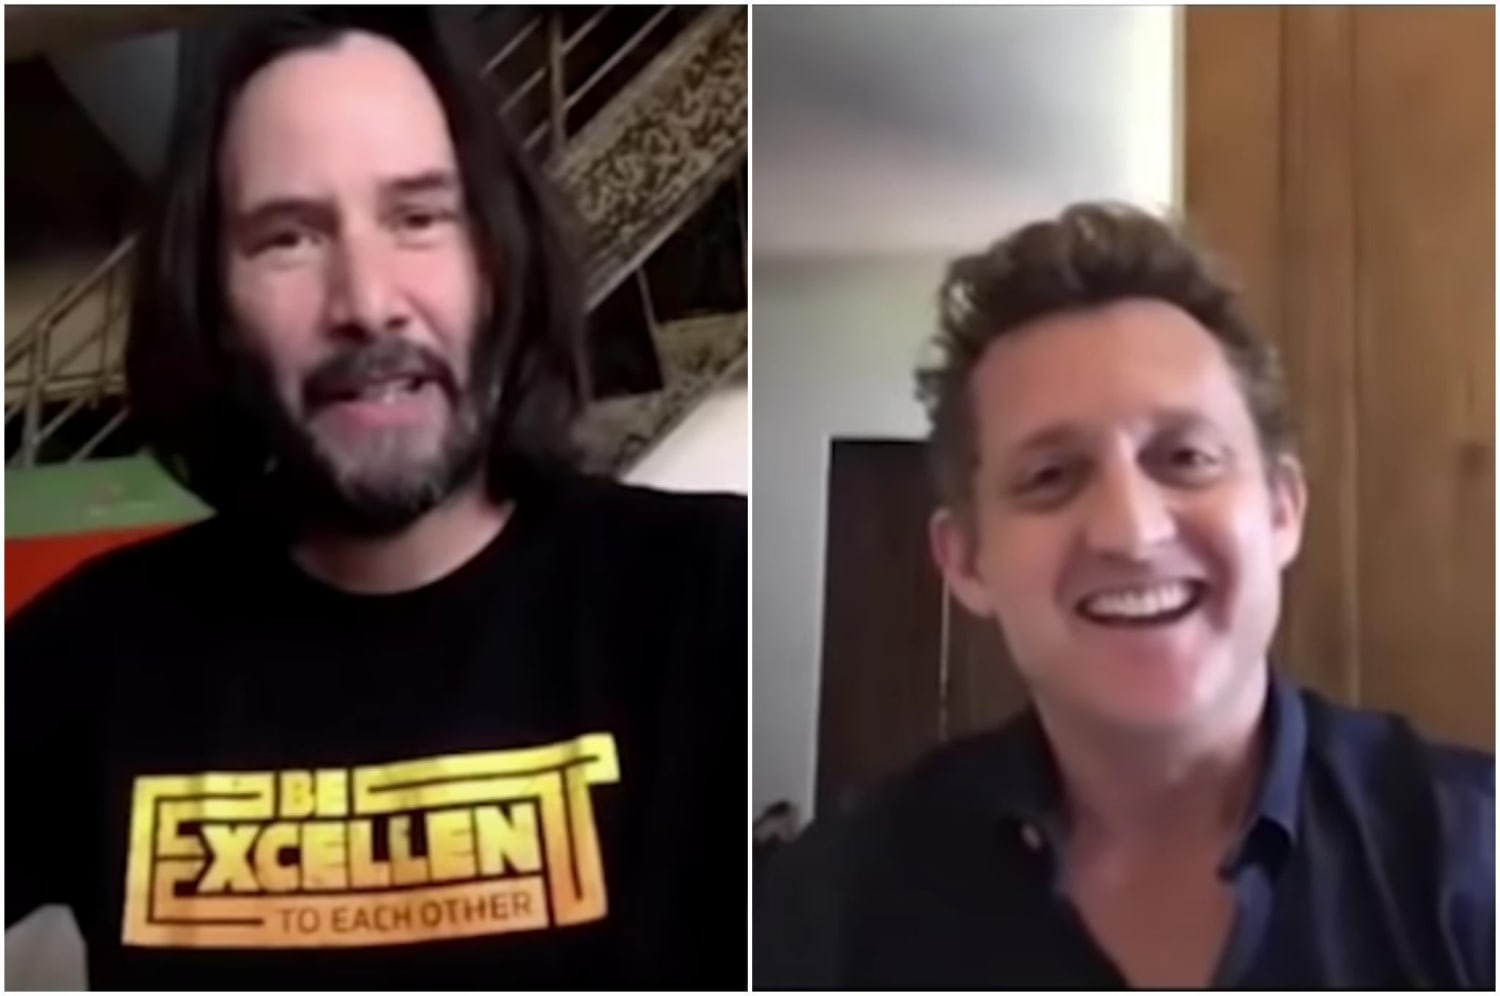 Keanu Reeves and Alex Winter tell high school graduating class to 'be excellent to each other'